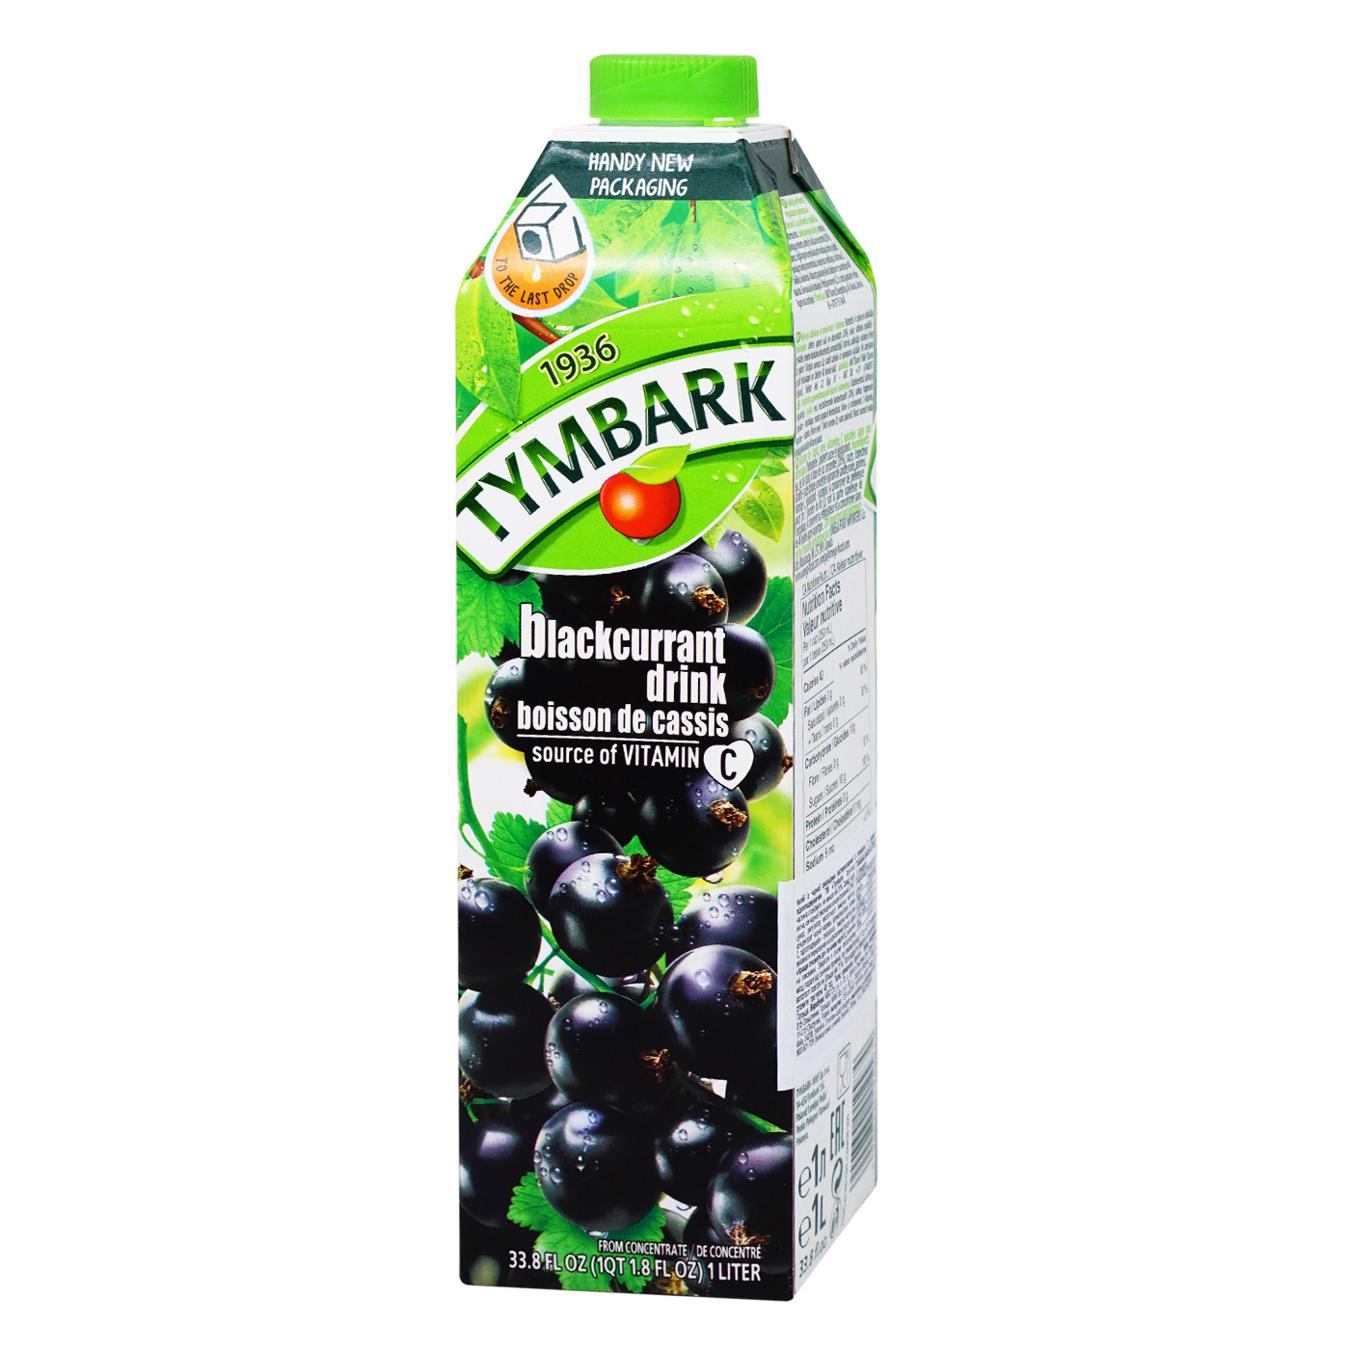 Tymbark blackcurrant drink 1l